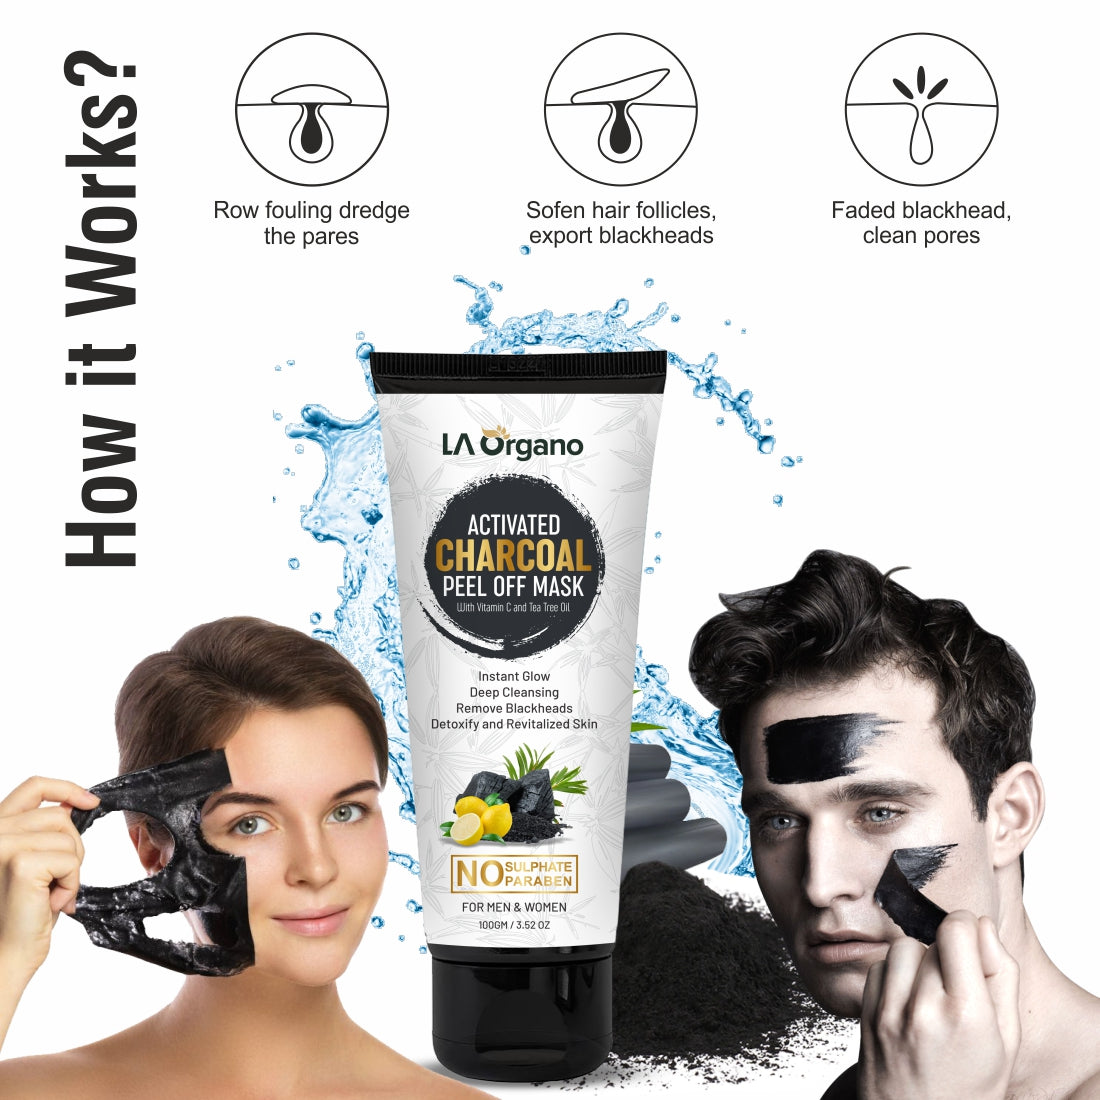 Activated Charcoal Skin Benefits Does It Really Work